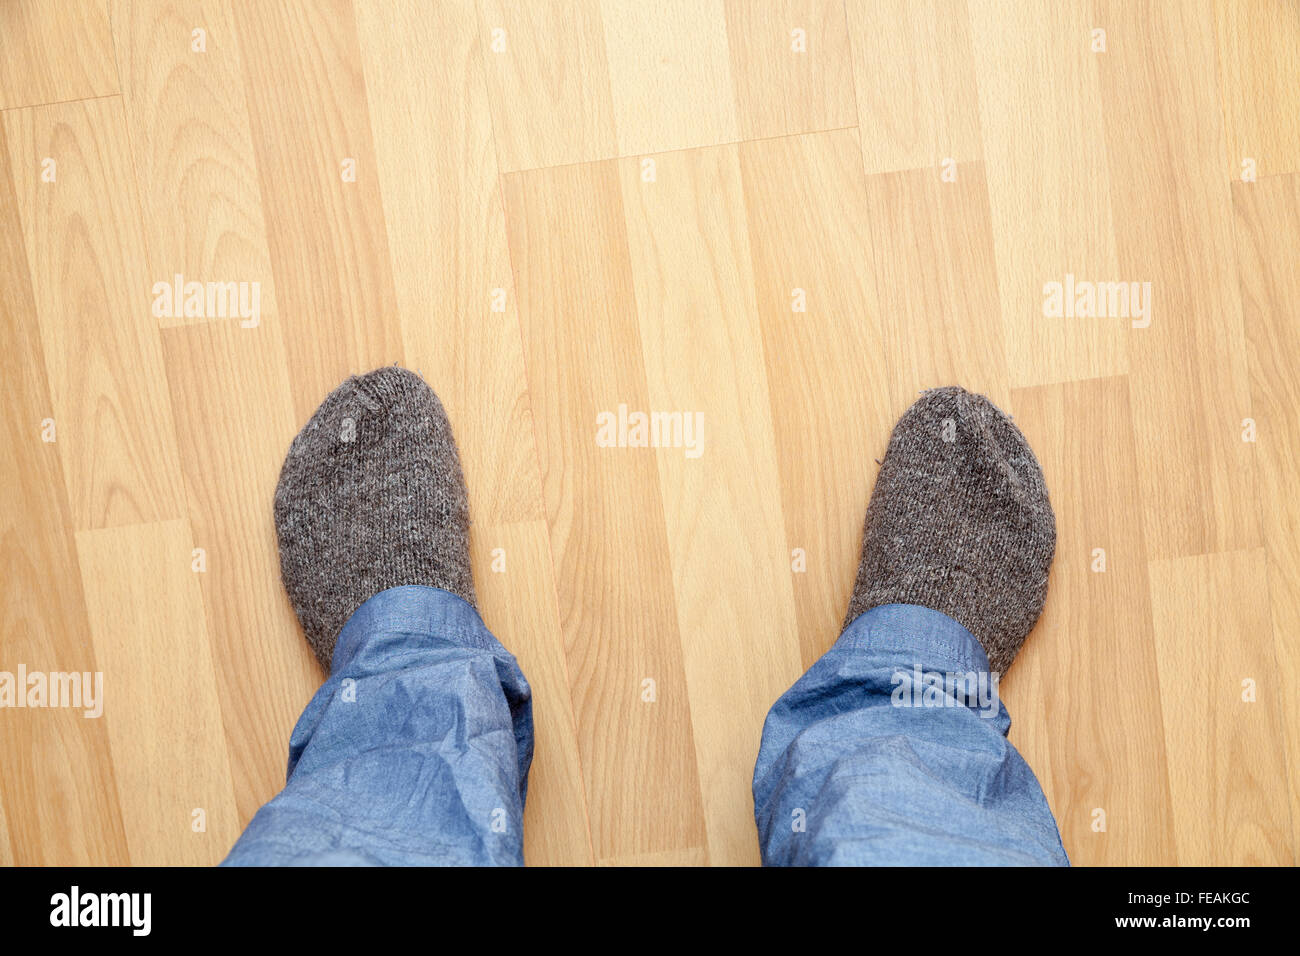 Male feet in blue pants and gray woolen socks stand on wooden parquet Stock Photo